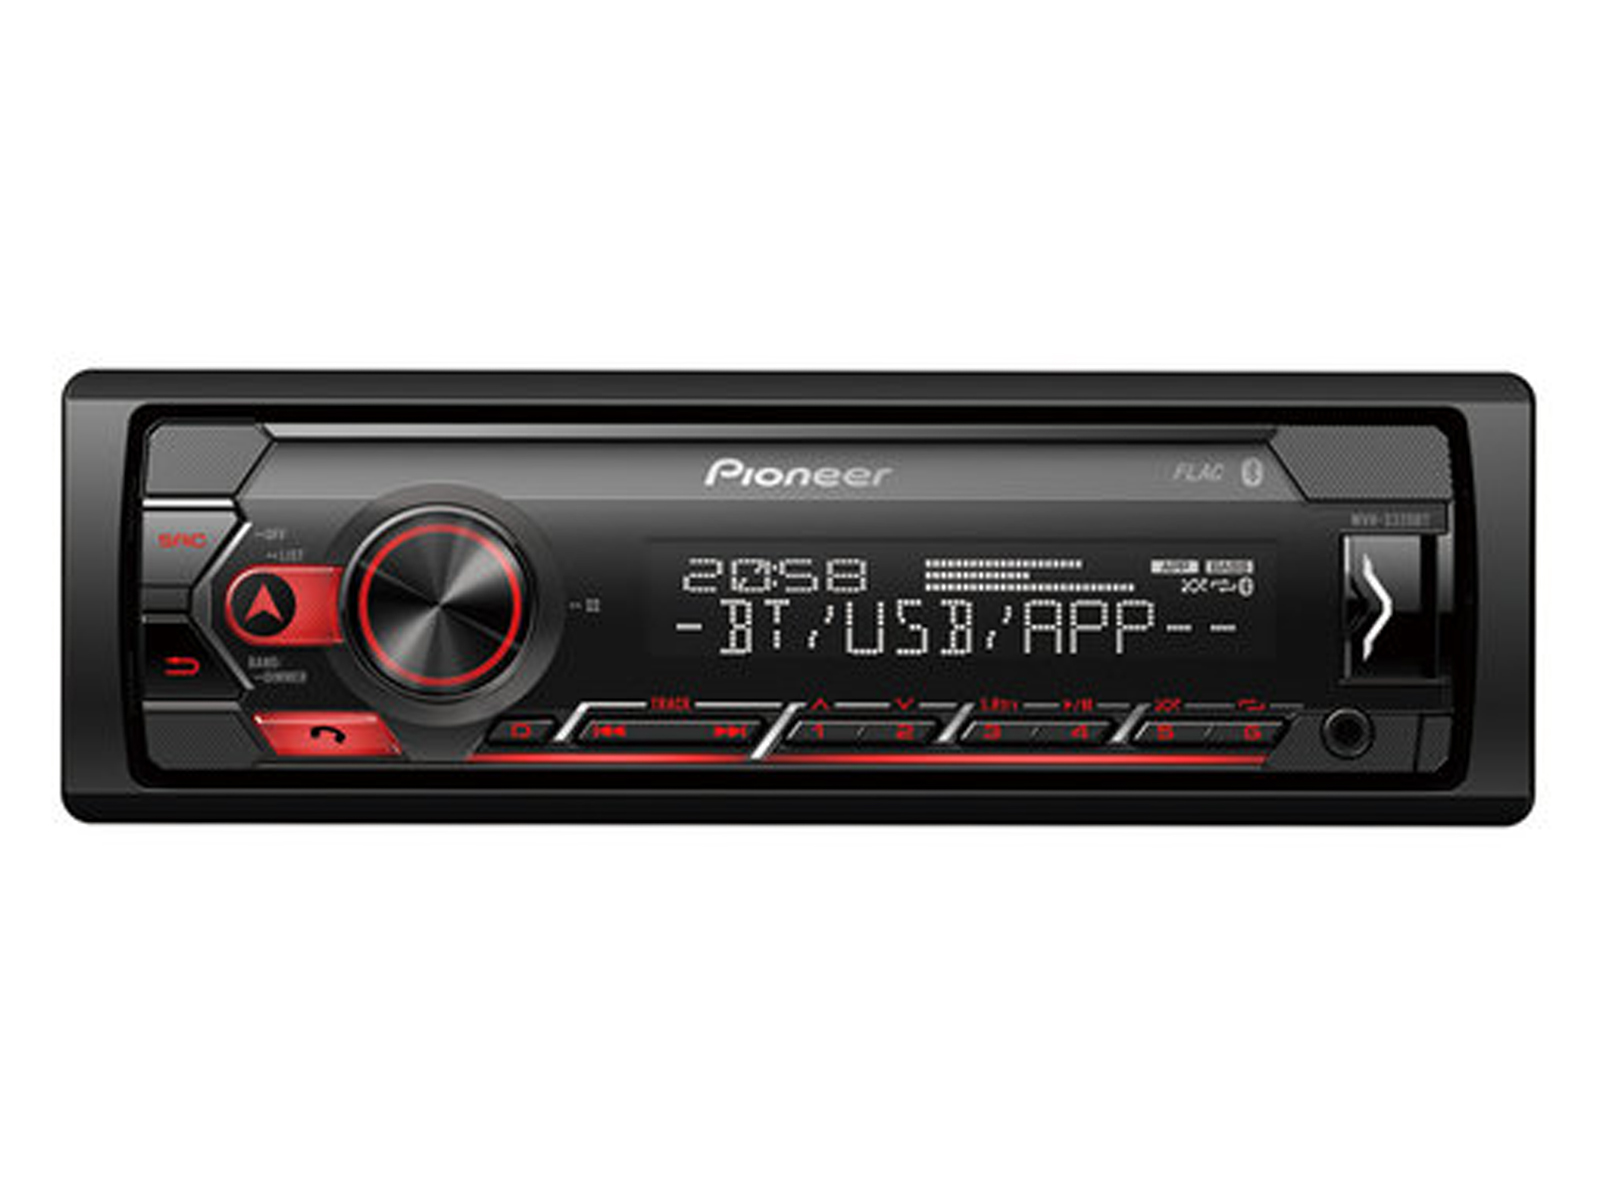 Pioneer MVH-S320BT 1-DIN Receiver with Bluetooth, Red Illumination, USB,  Spotify, Pioneer Smart Sync App and Compatible with Android Devices.